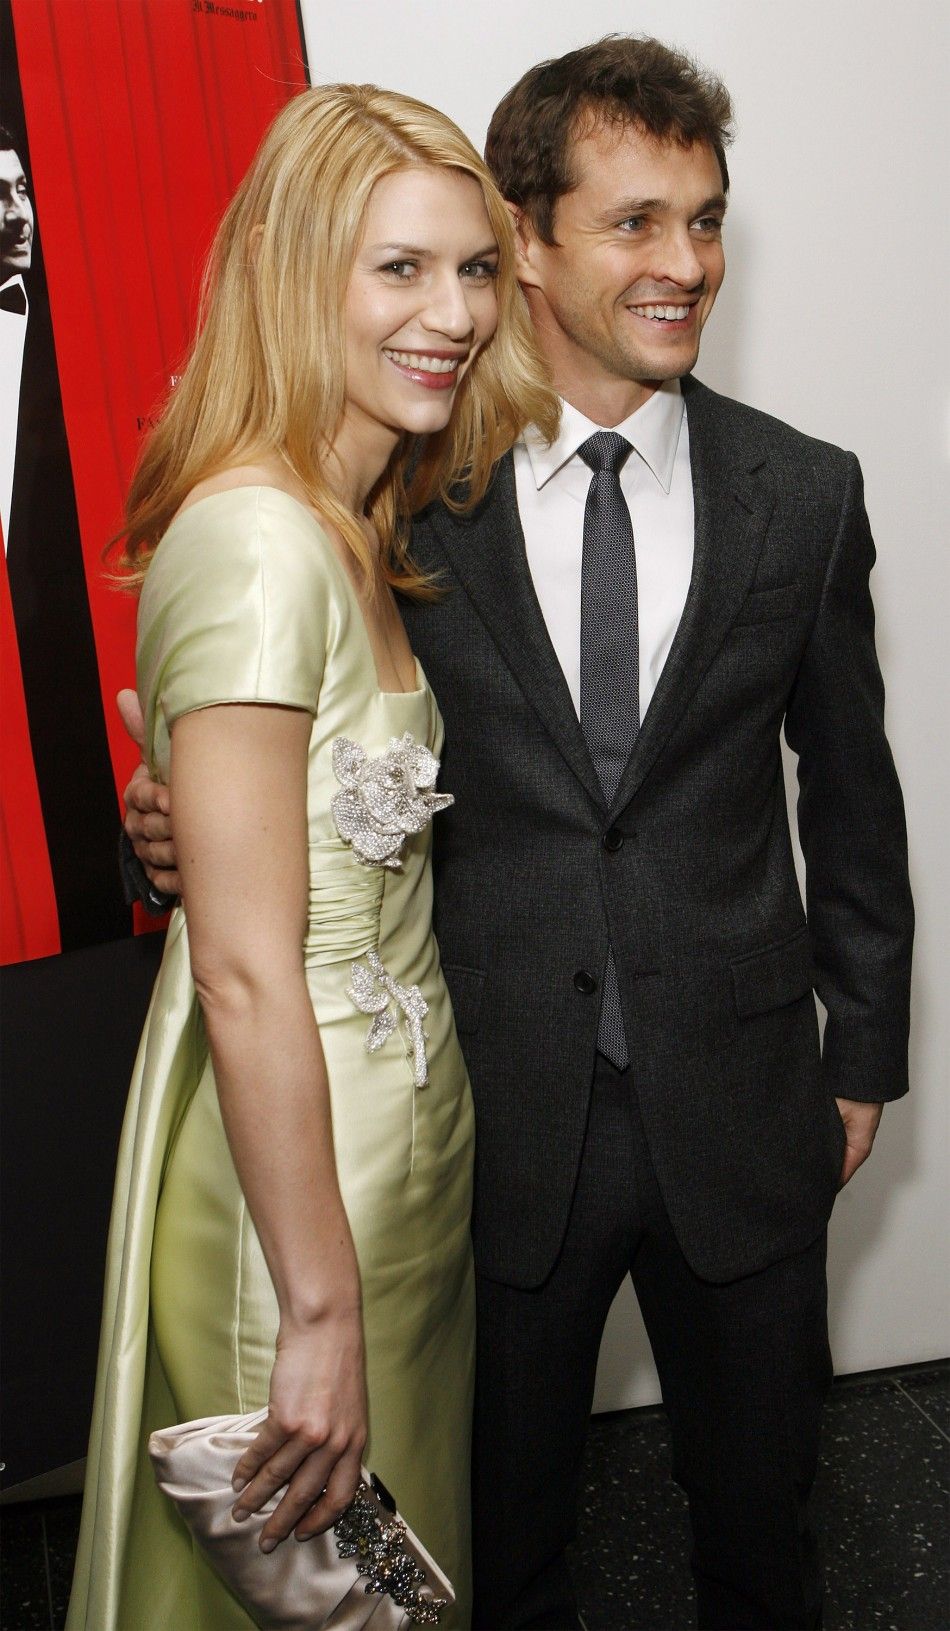 Actress Claire Danes arrives with actor Hugh Dancy at the premiere of the film quotValentino The Last Emperorquot in New York